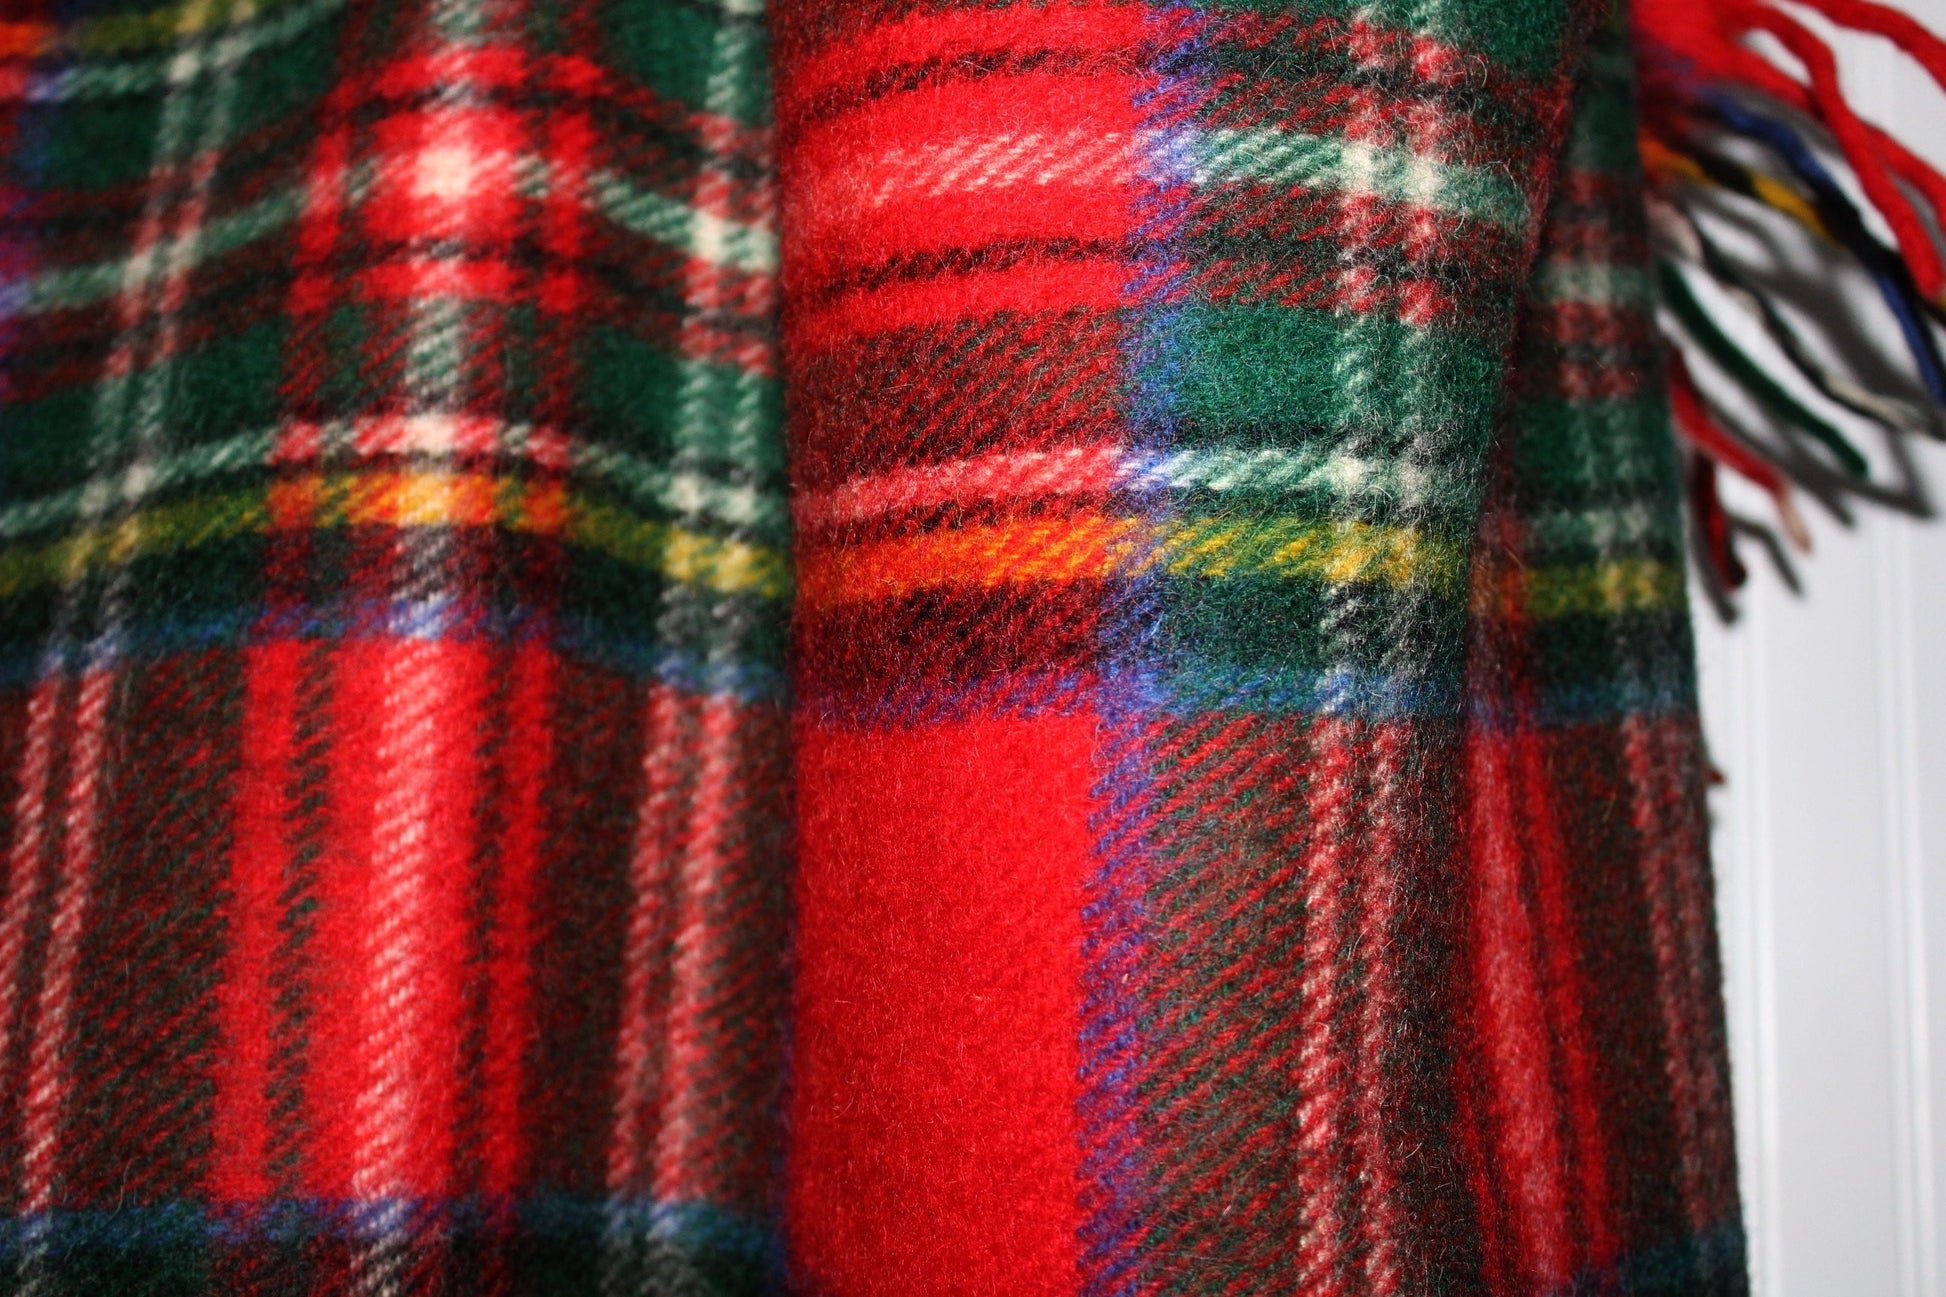 Horner Wool Fringed Throw 51" X 63" Red Tartan Plaid Heavy Soft Nap Excellent 1950s unusual